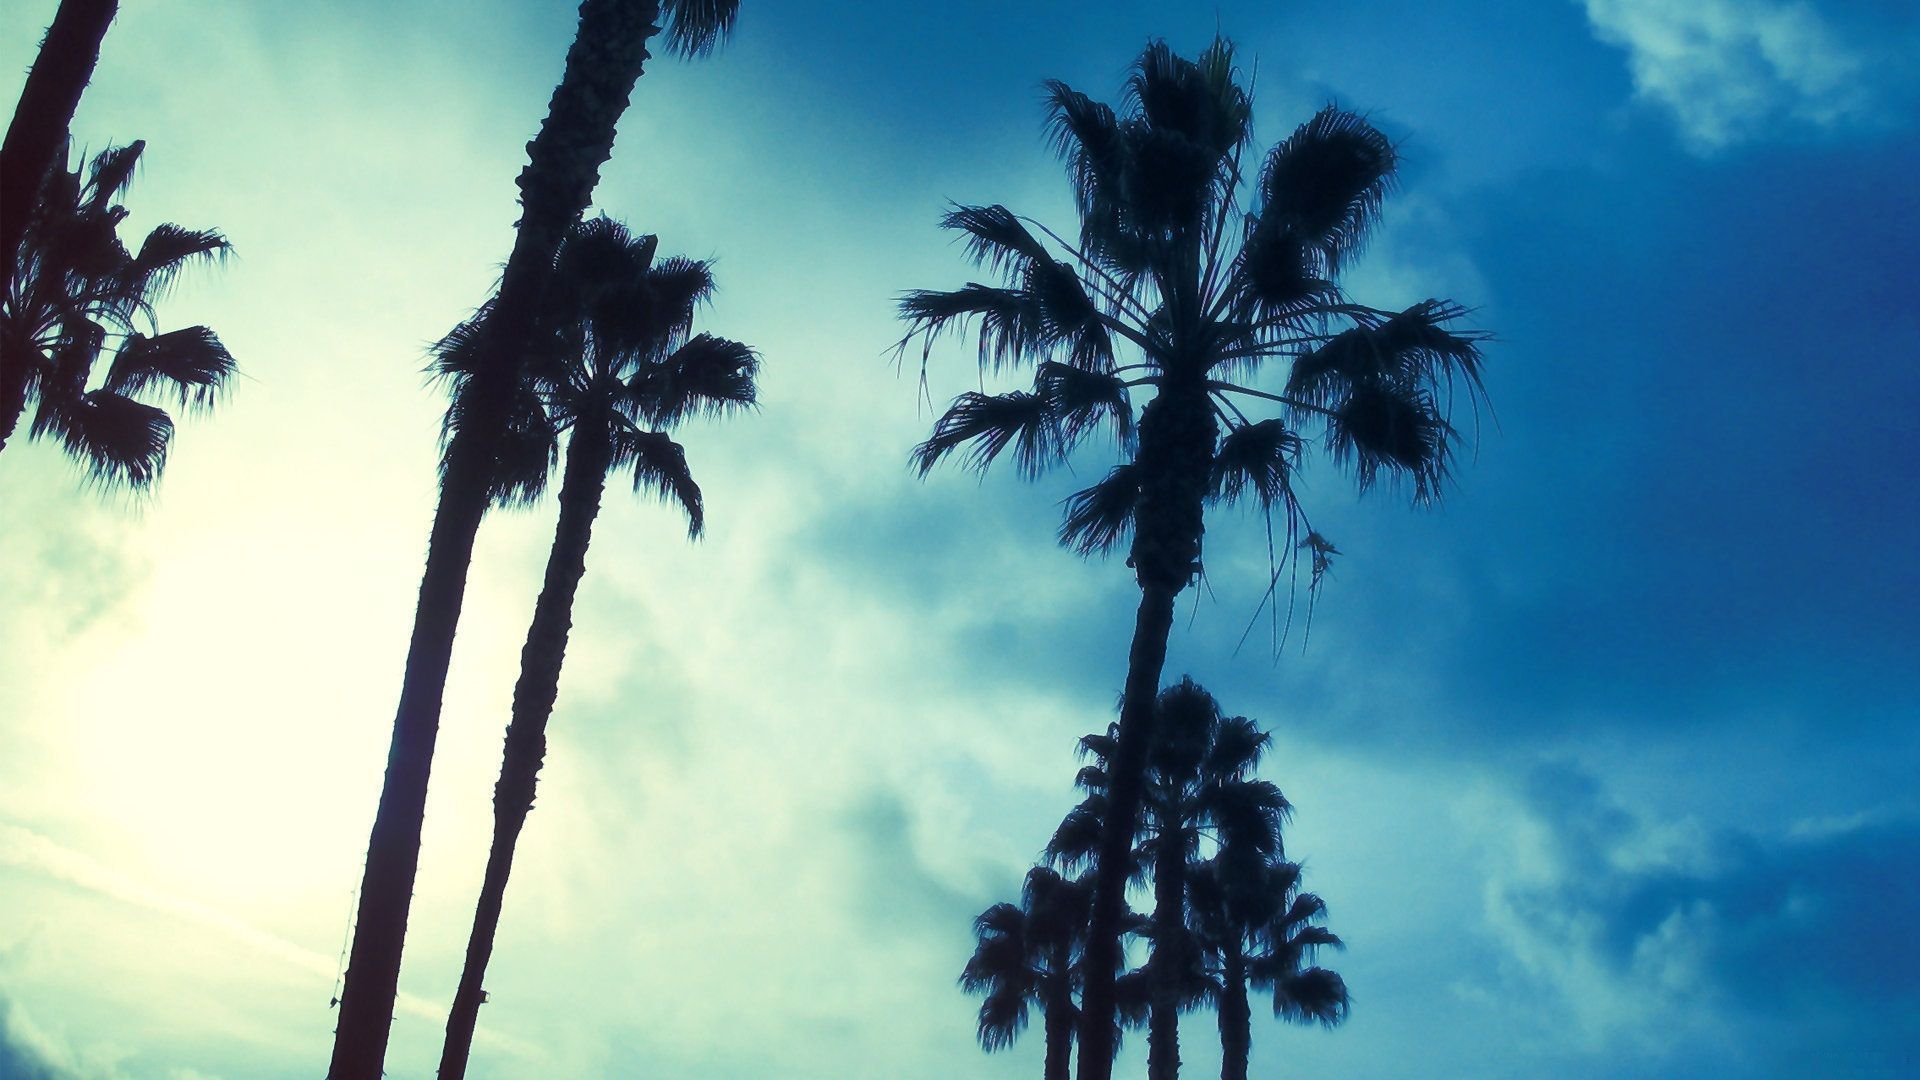 Gallery for - palm tree wallpaper